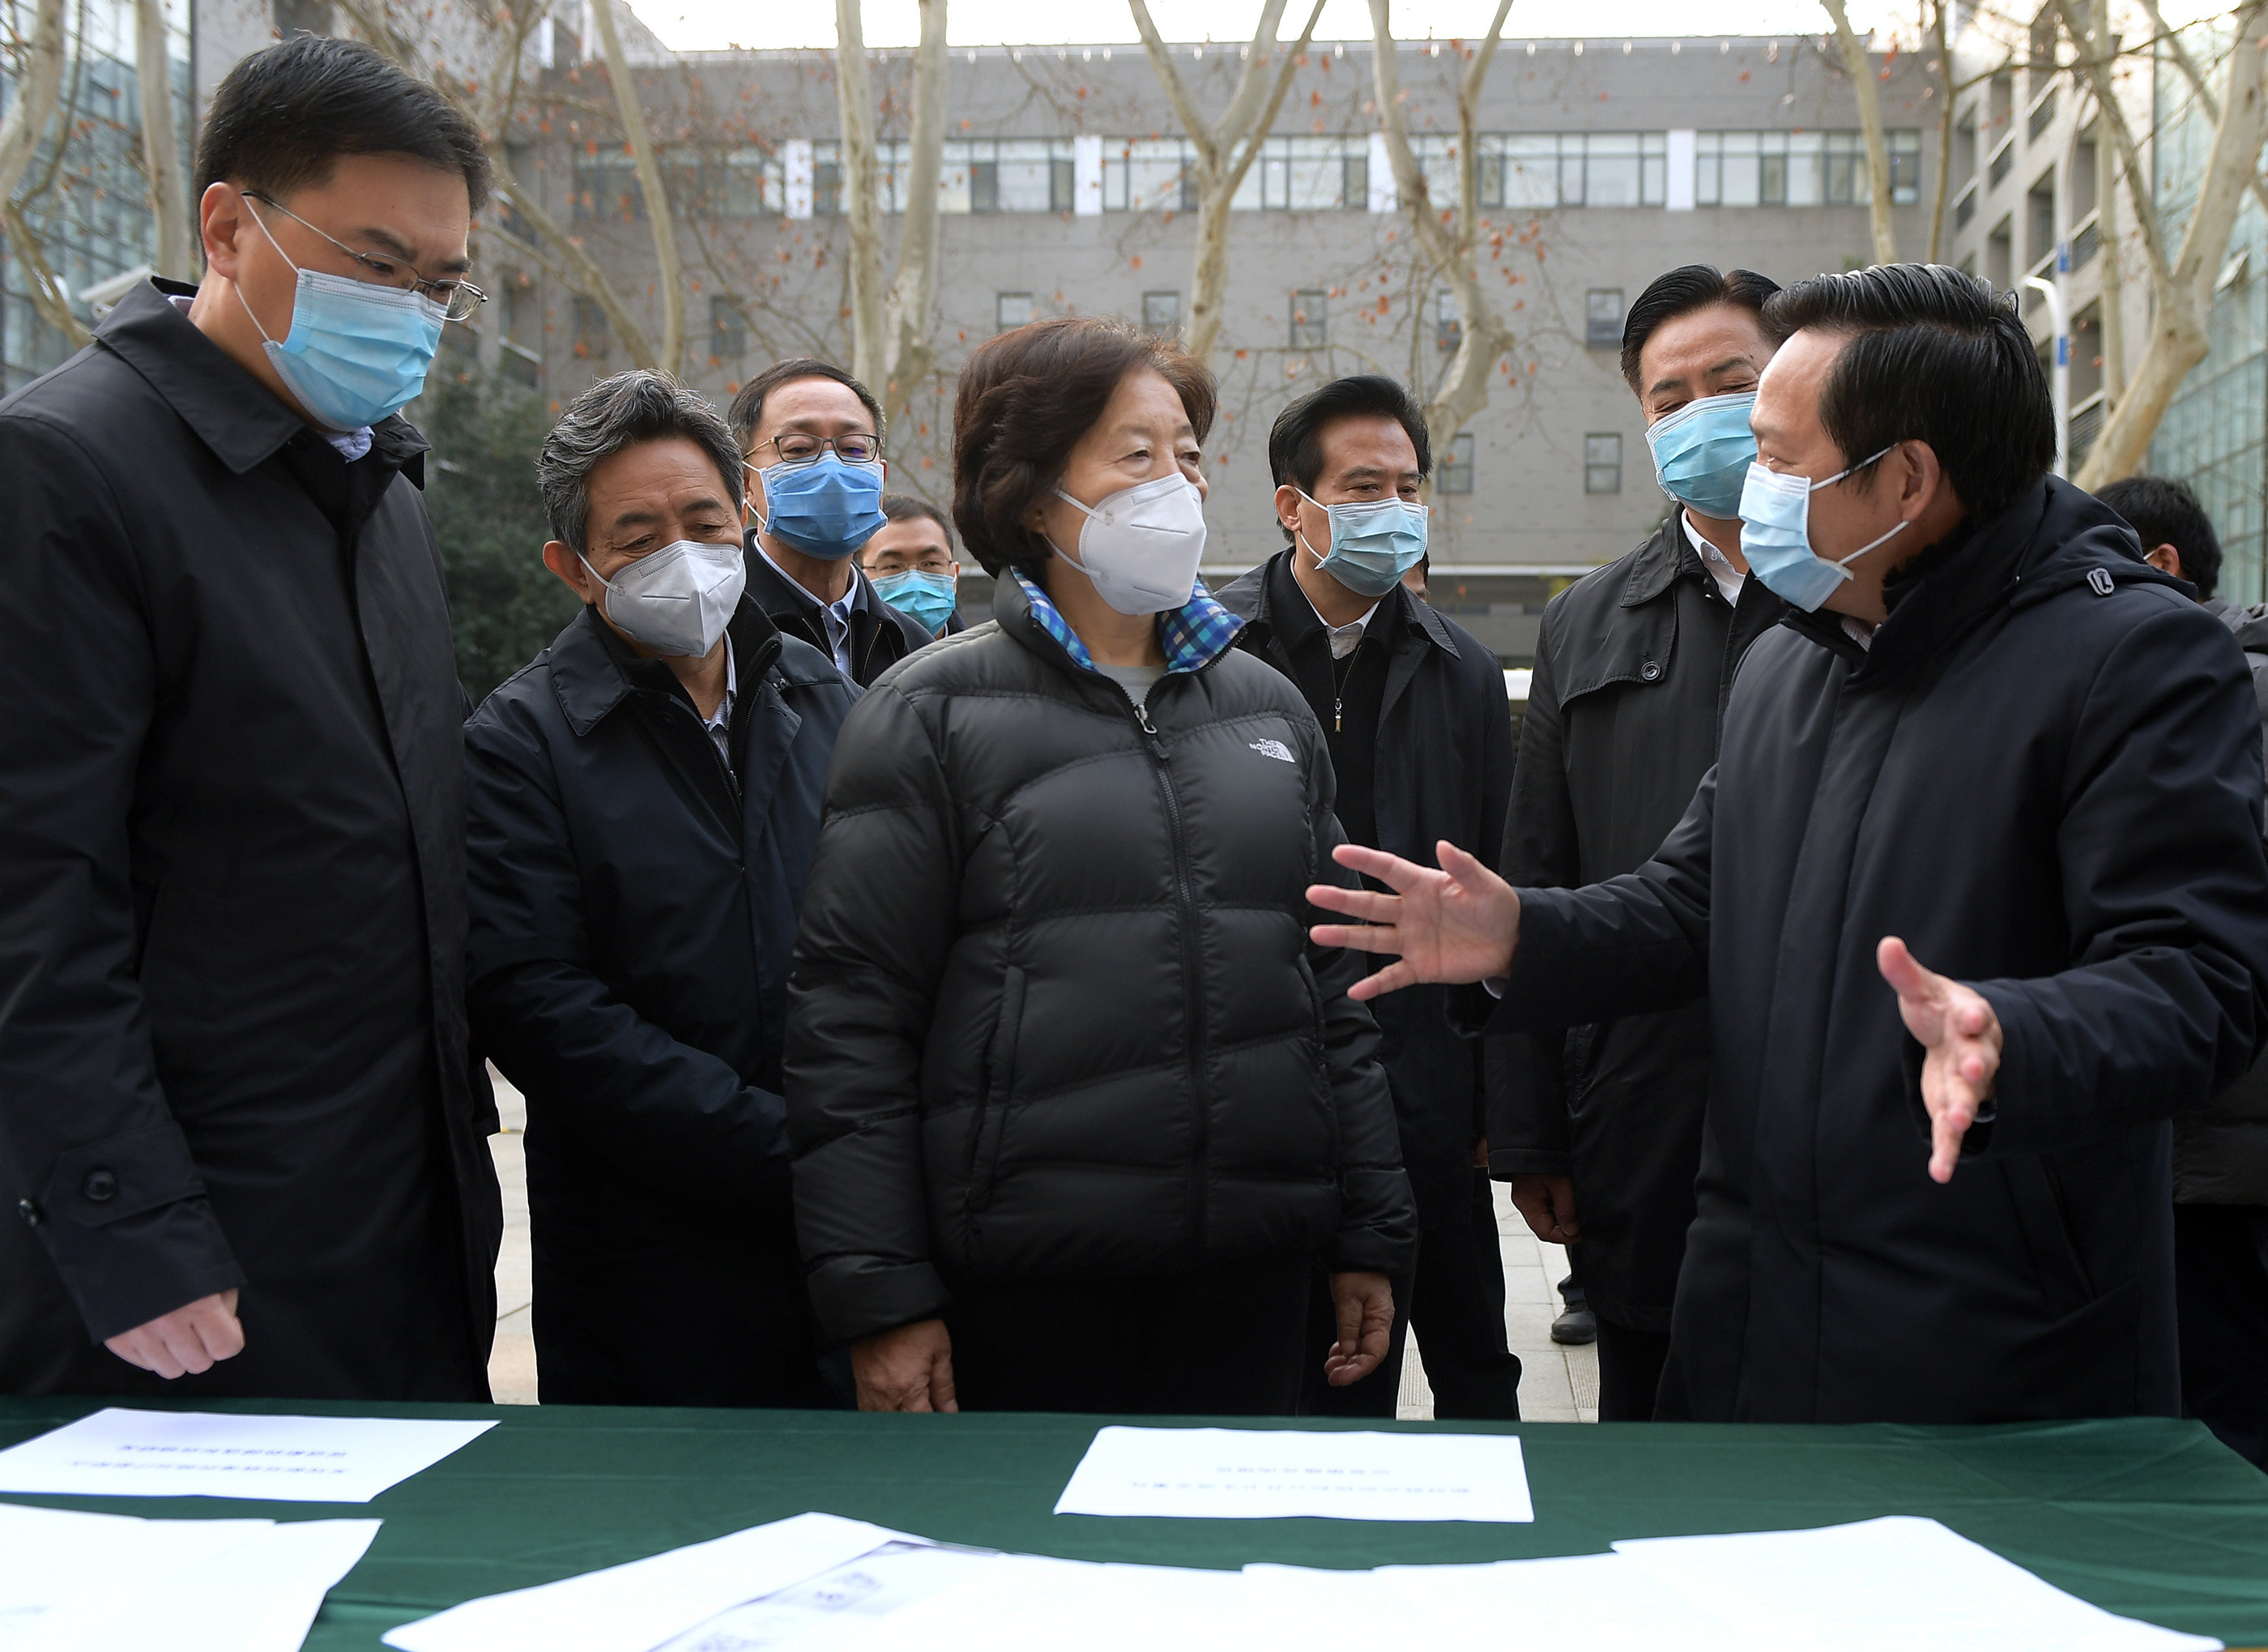 Chinese Vice-Premier and Poliburo member Sun Chunlan was prominent in China’s response to the coronavirus outbreak. The new Politburo line-up is all male, prompting observations that future political diversity will be lacking. Photo: Xinhua